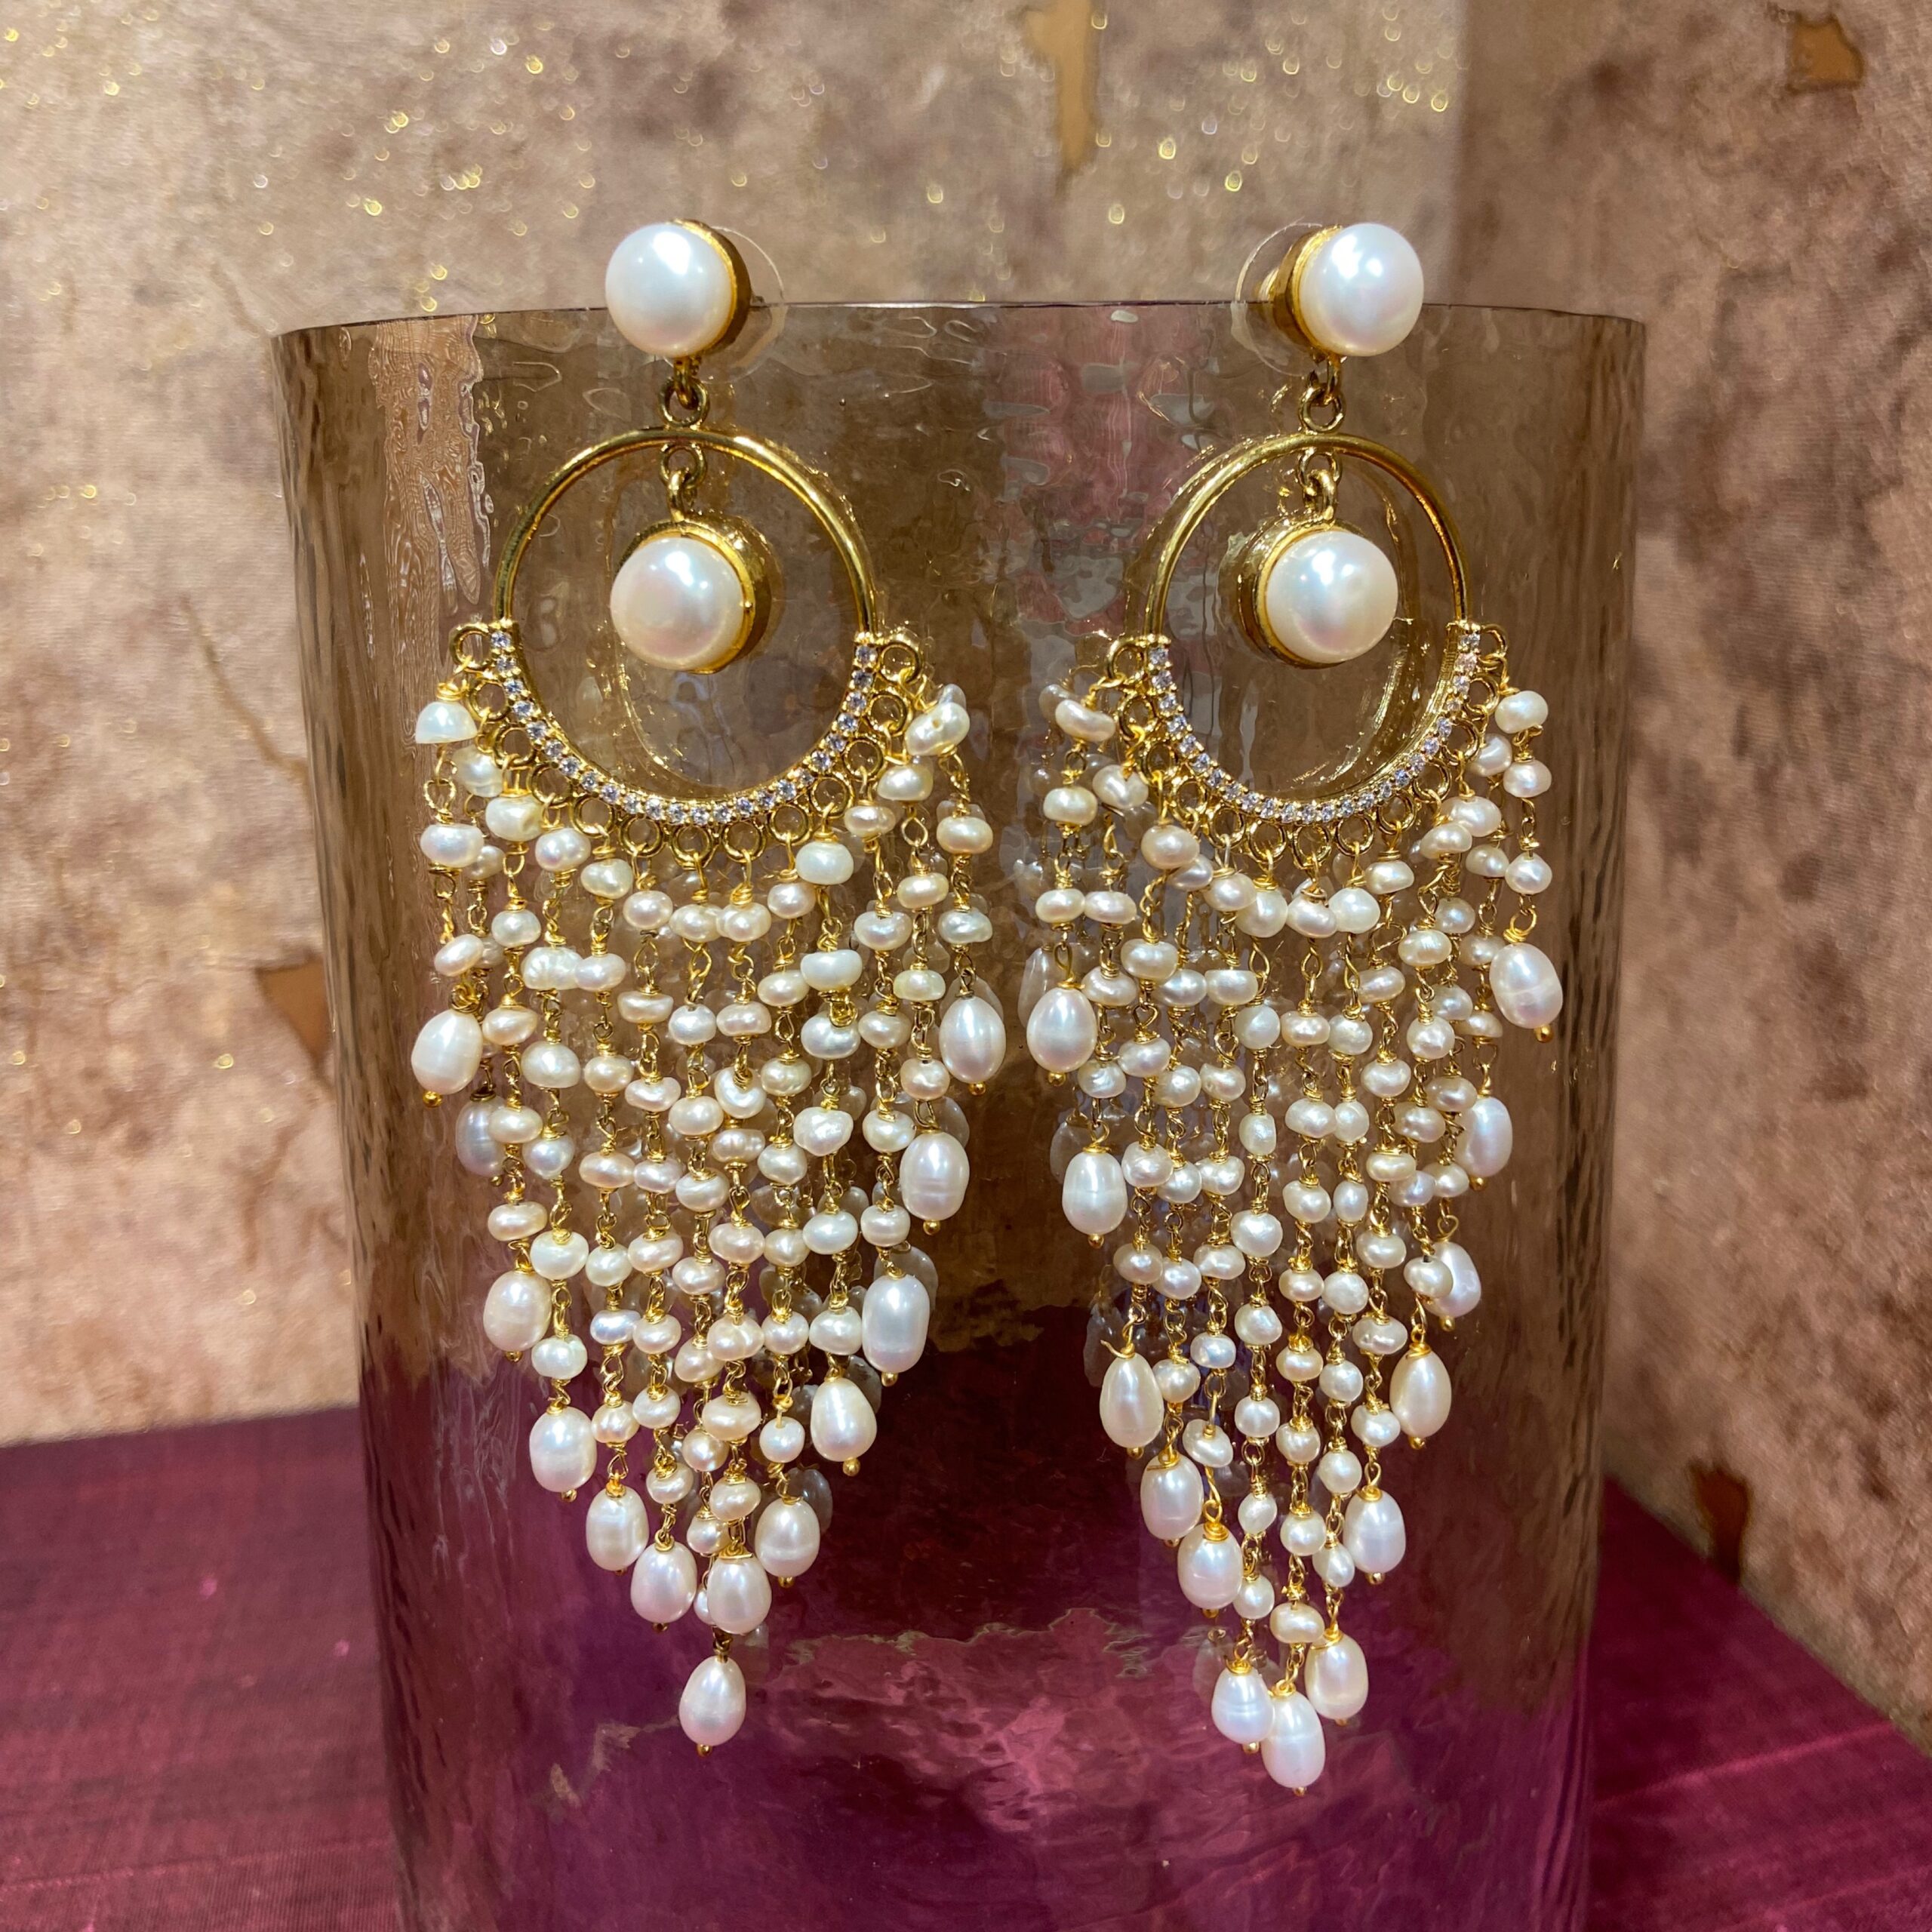 Magnificent Chand Bali Earrings Featuring Cascading Seed Pearls